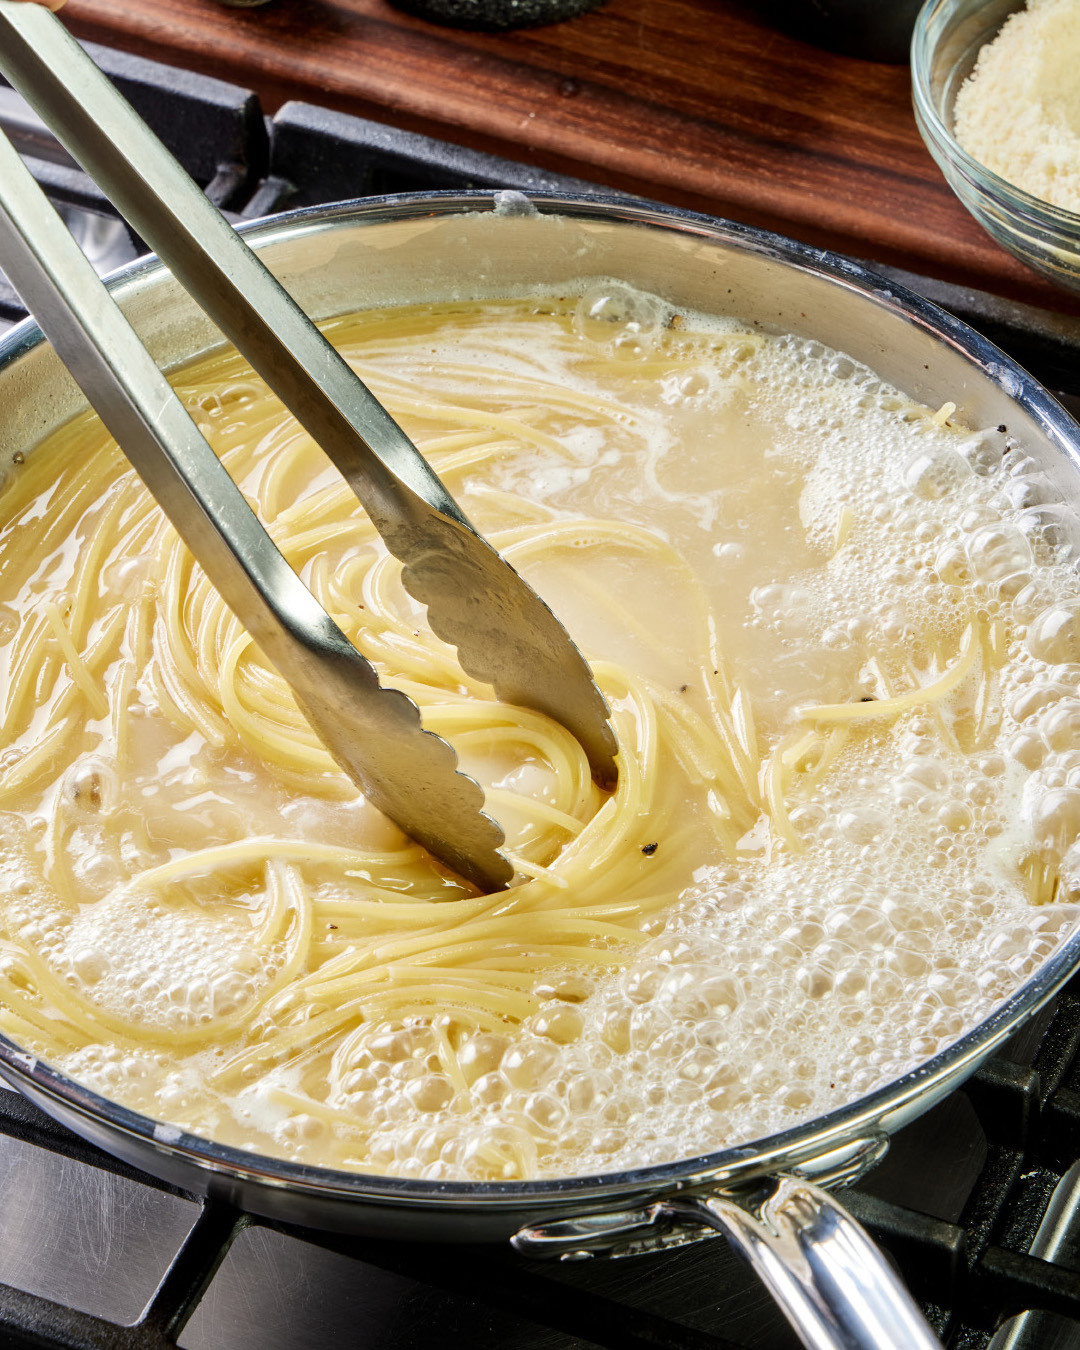 4. Cook until just shy of al dente; the pasta will no longer be fully submerged and there should be at least 1 cup of starchy liquid in the pan.